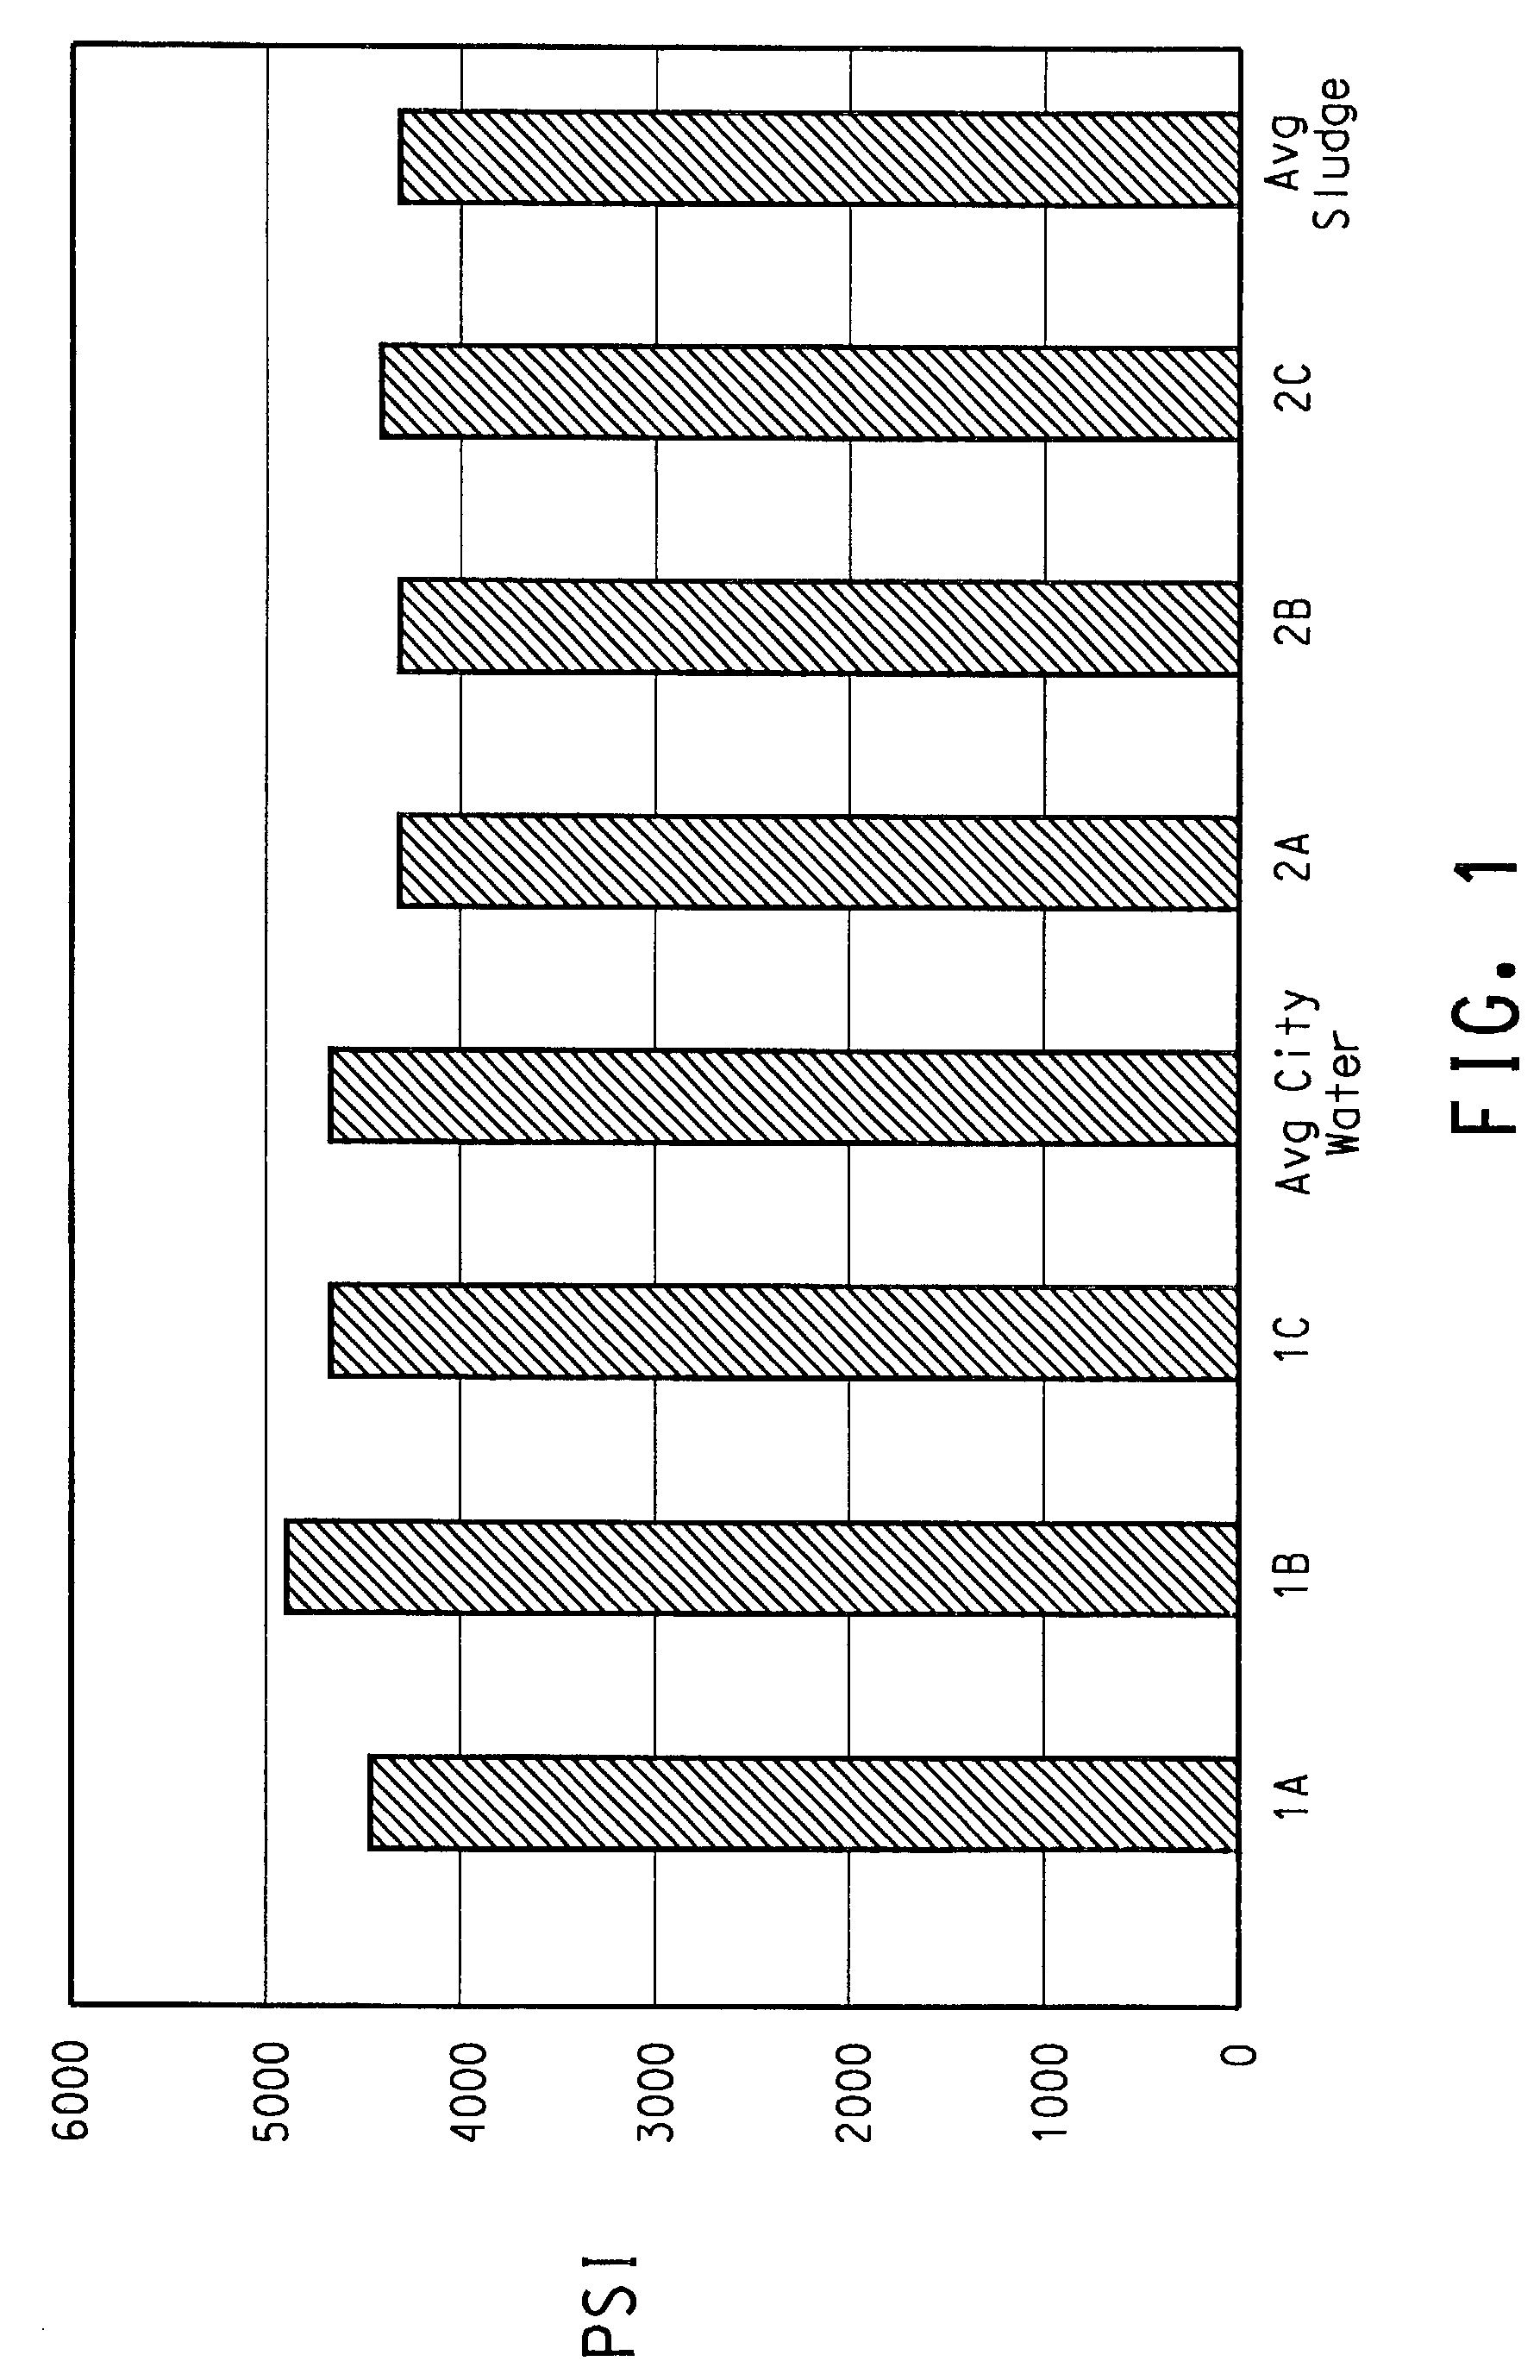 Process for producing building materials from raw paint sludge